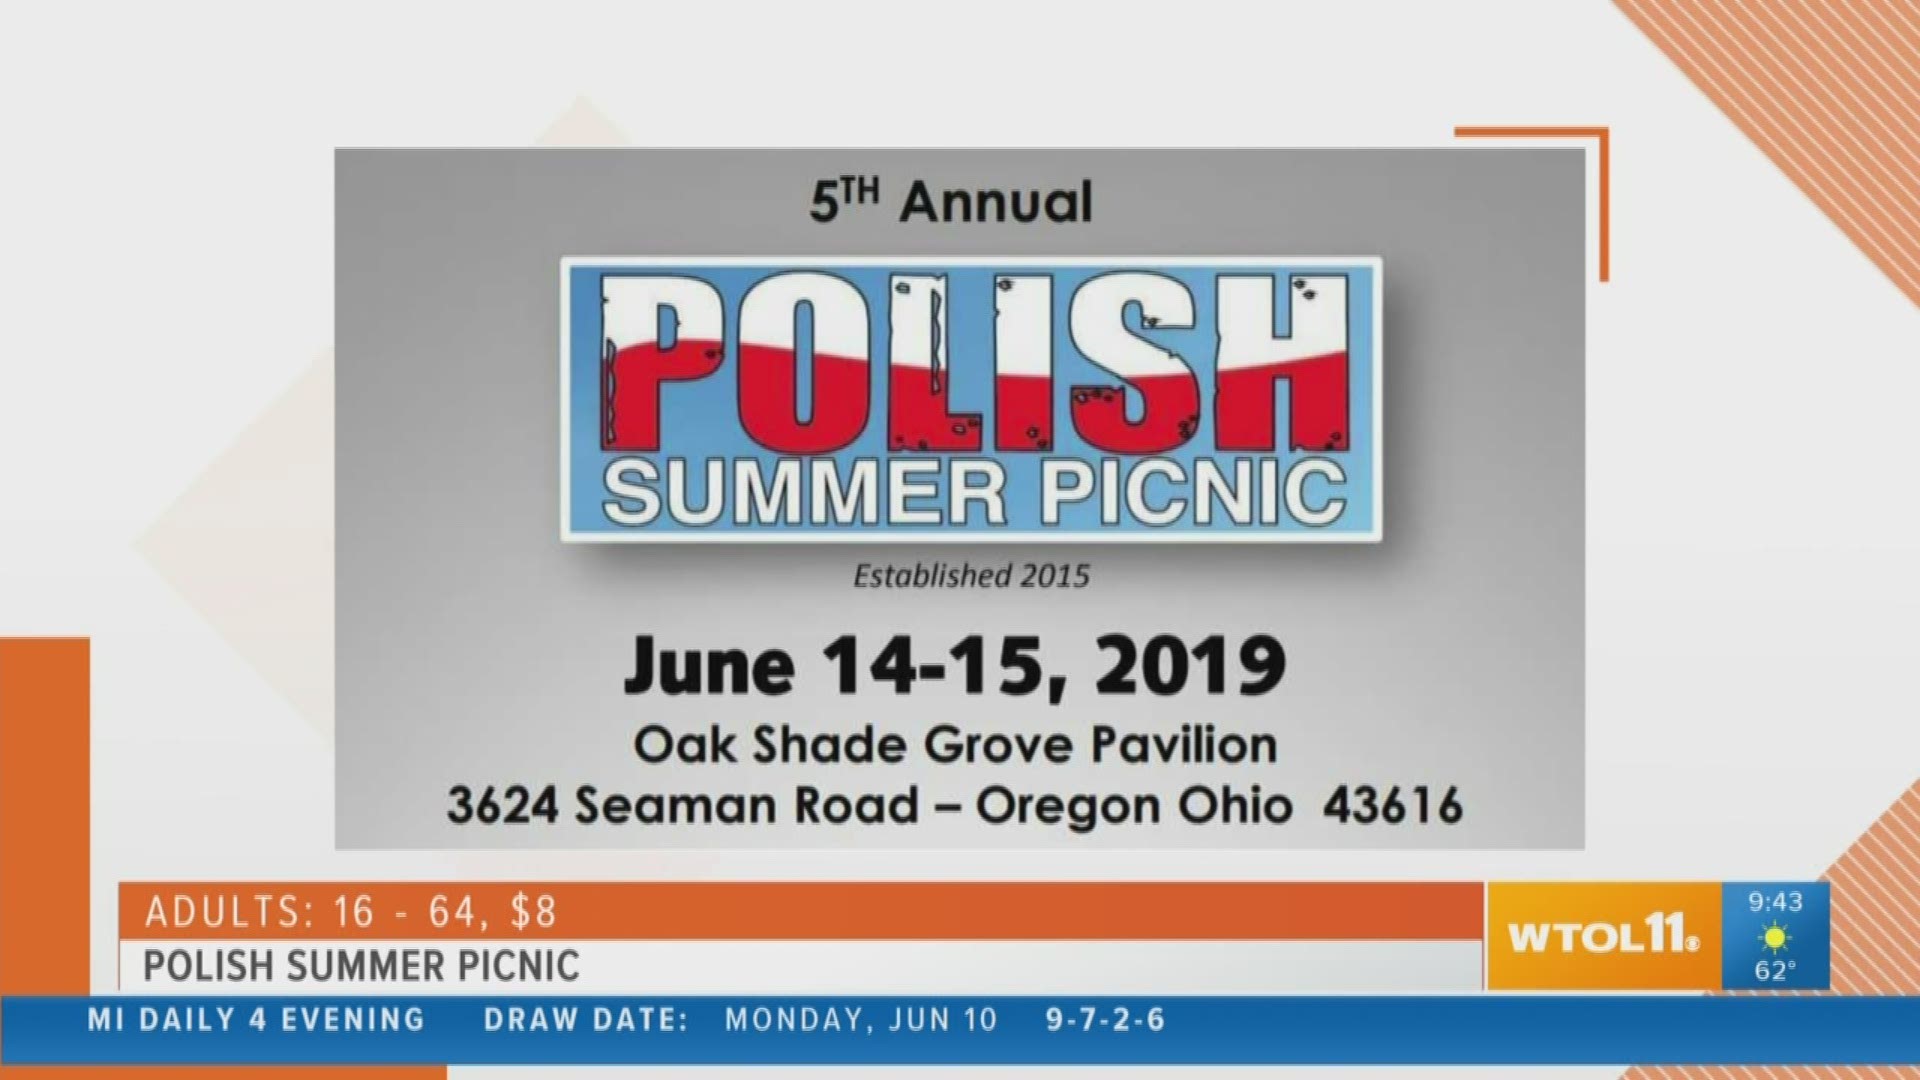 Treat dad to dinner and dancing at the Polish Summer Picnic this weekend!